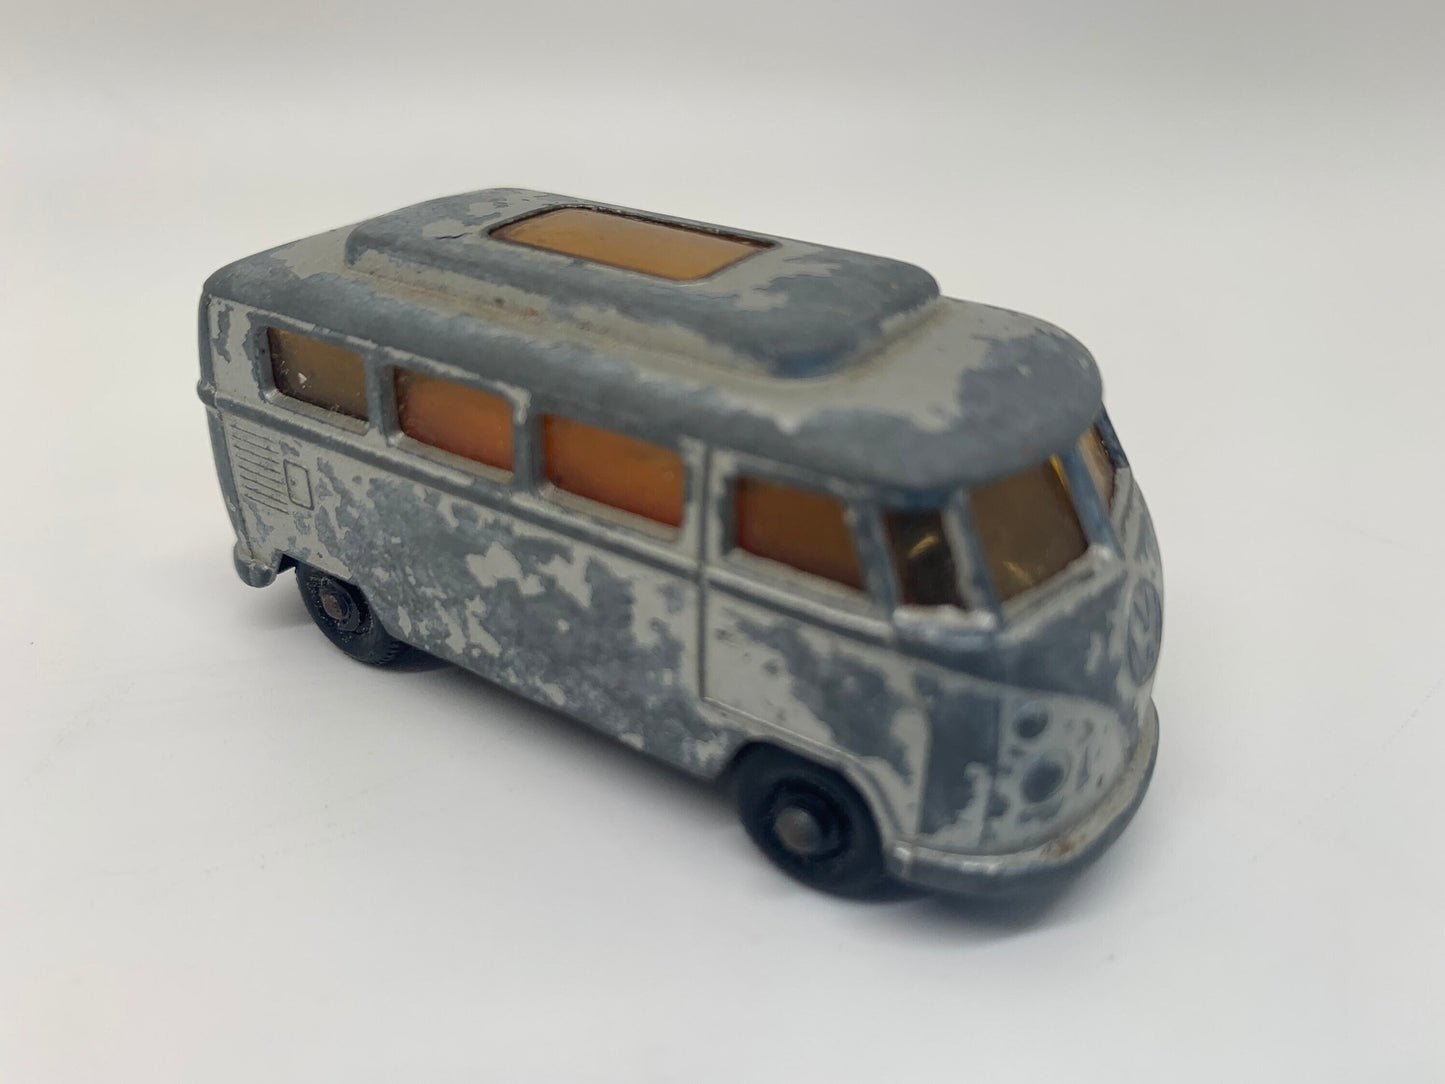 Matchbox 1967 Volkswagen Camper 34-C Grey Collectable Miniature Scale Model Toy Car Perfect Birthday Gift